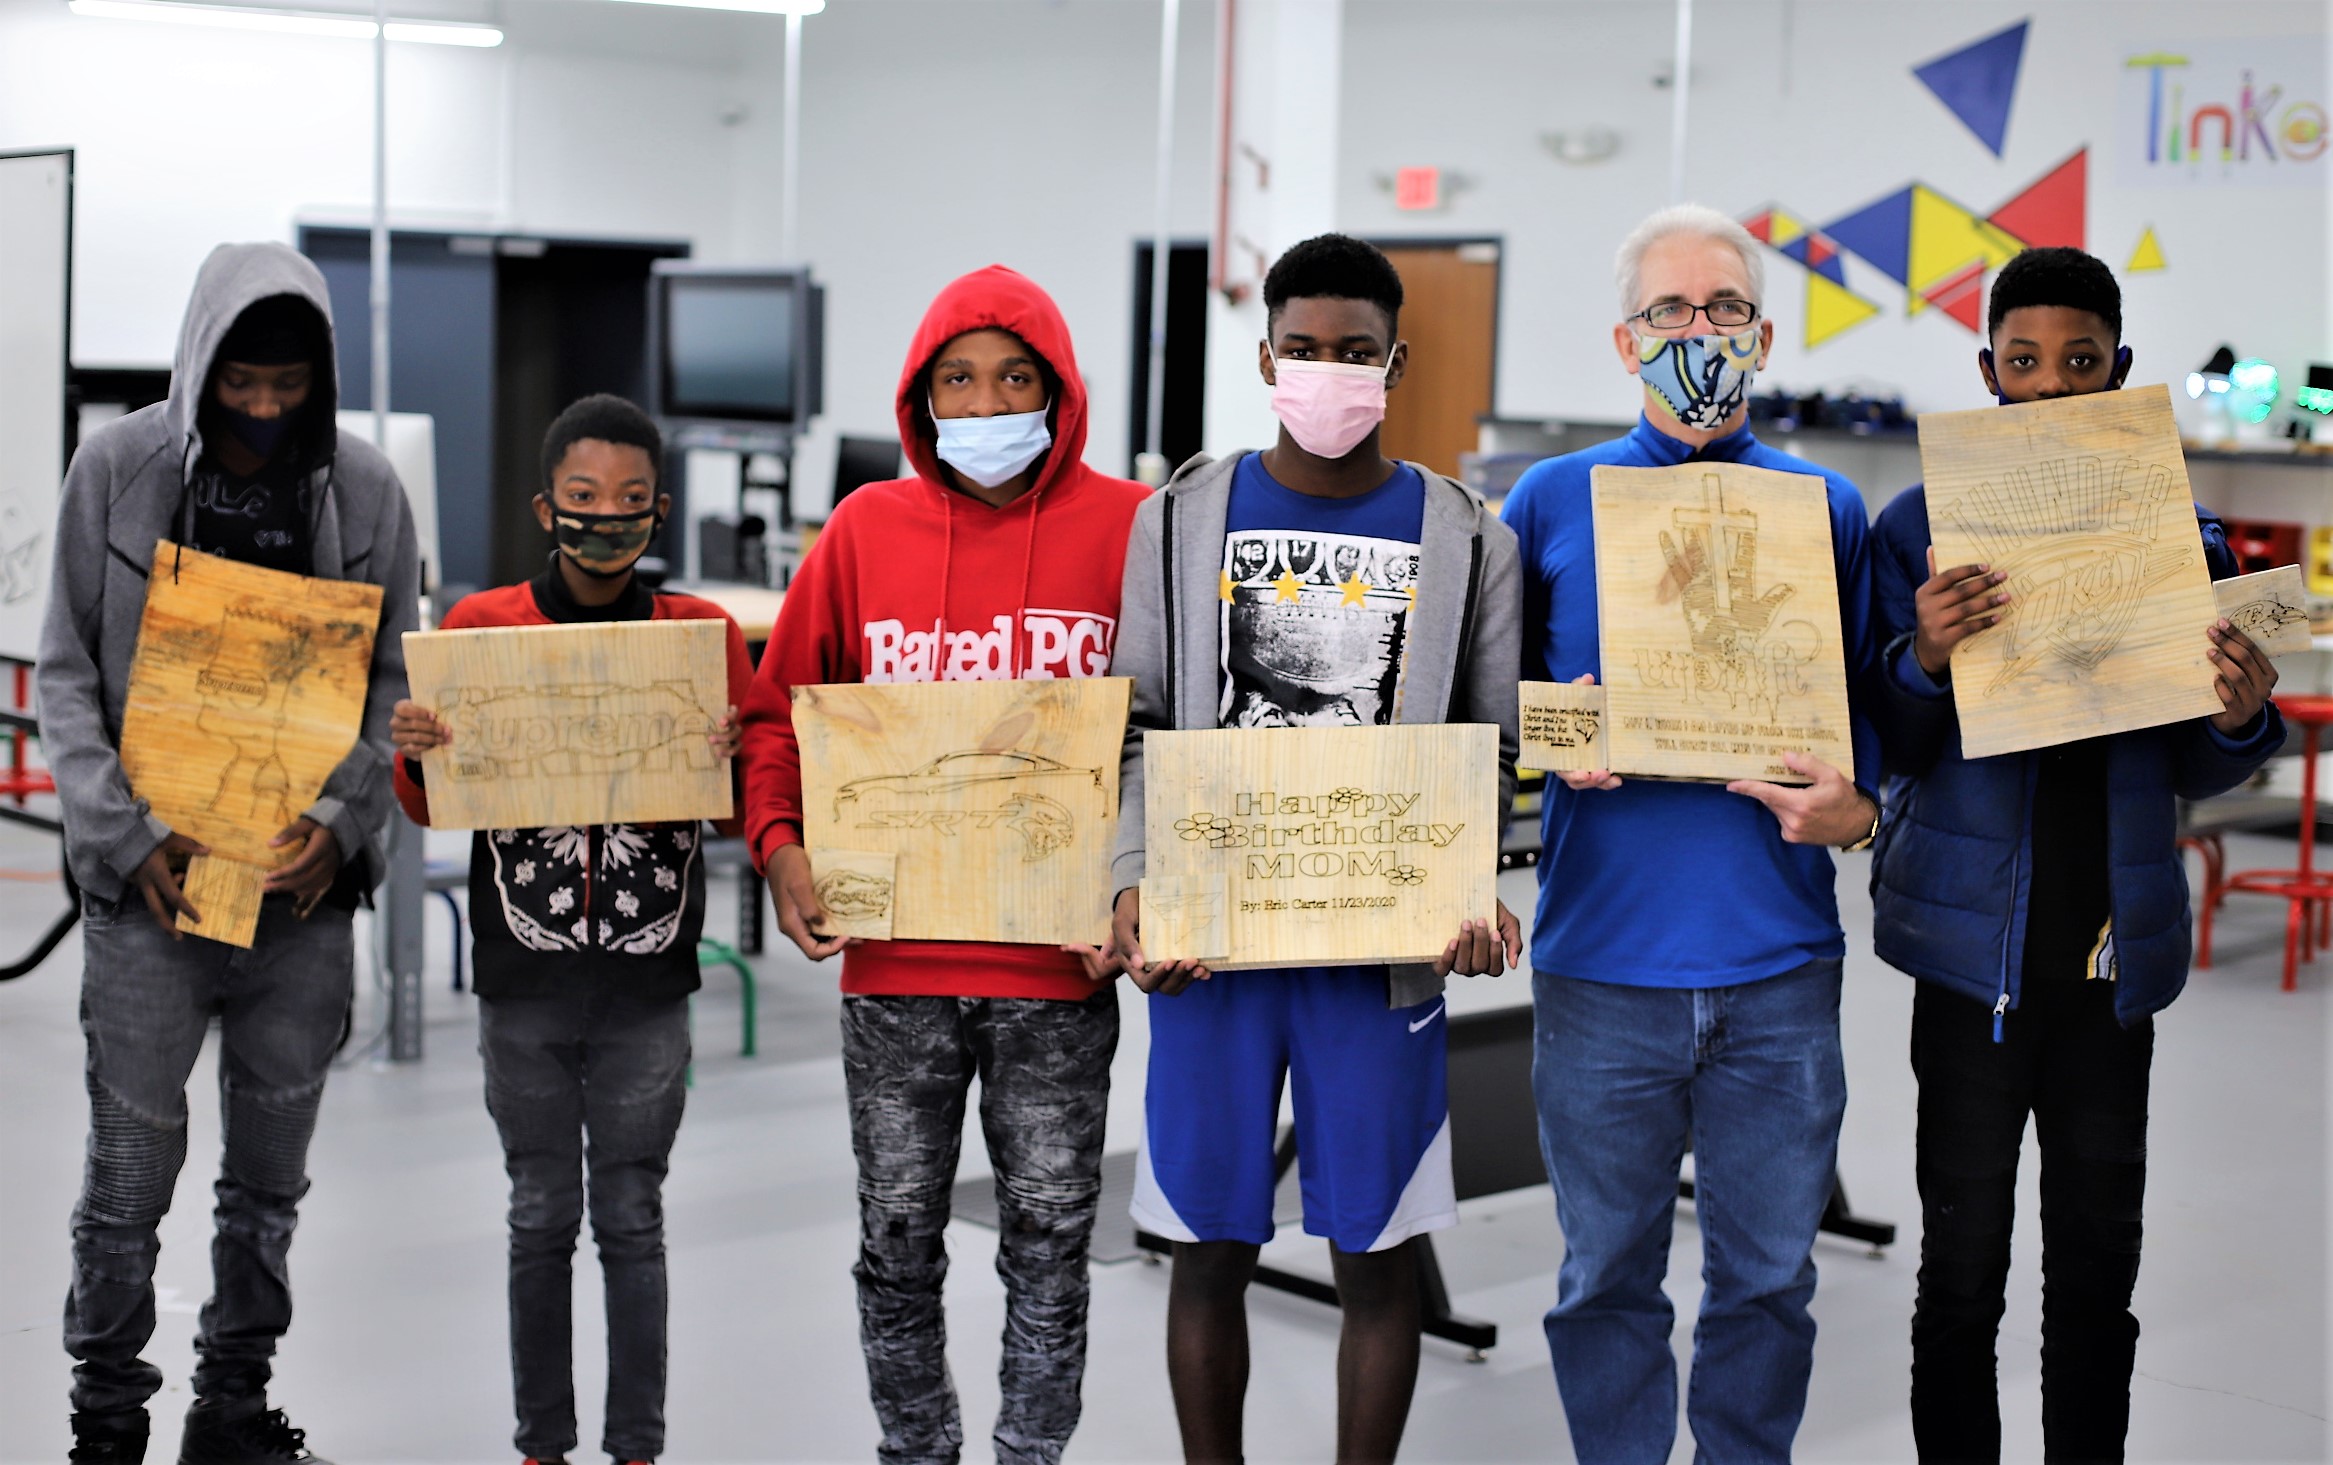 Students made holding there wood board laser project cut out